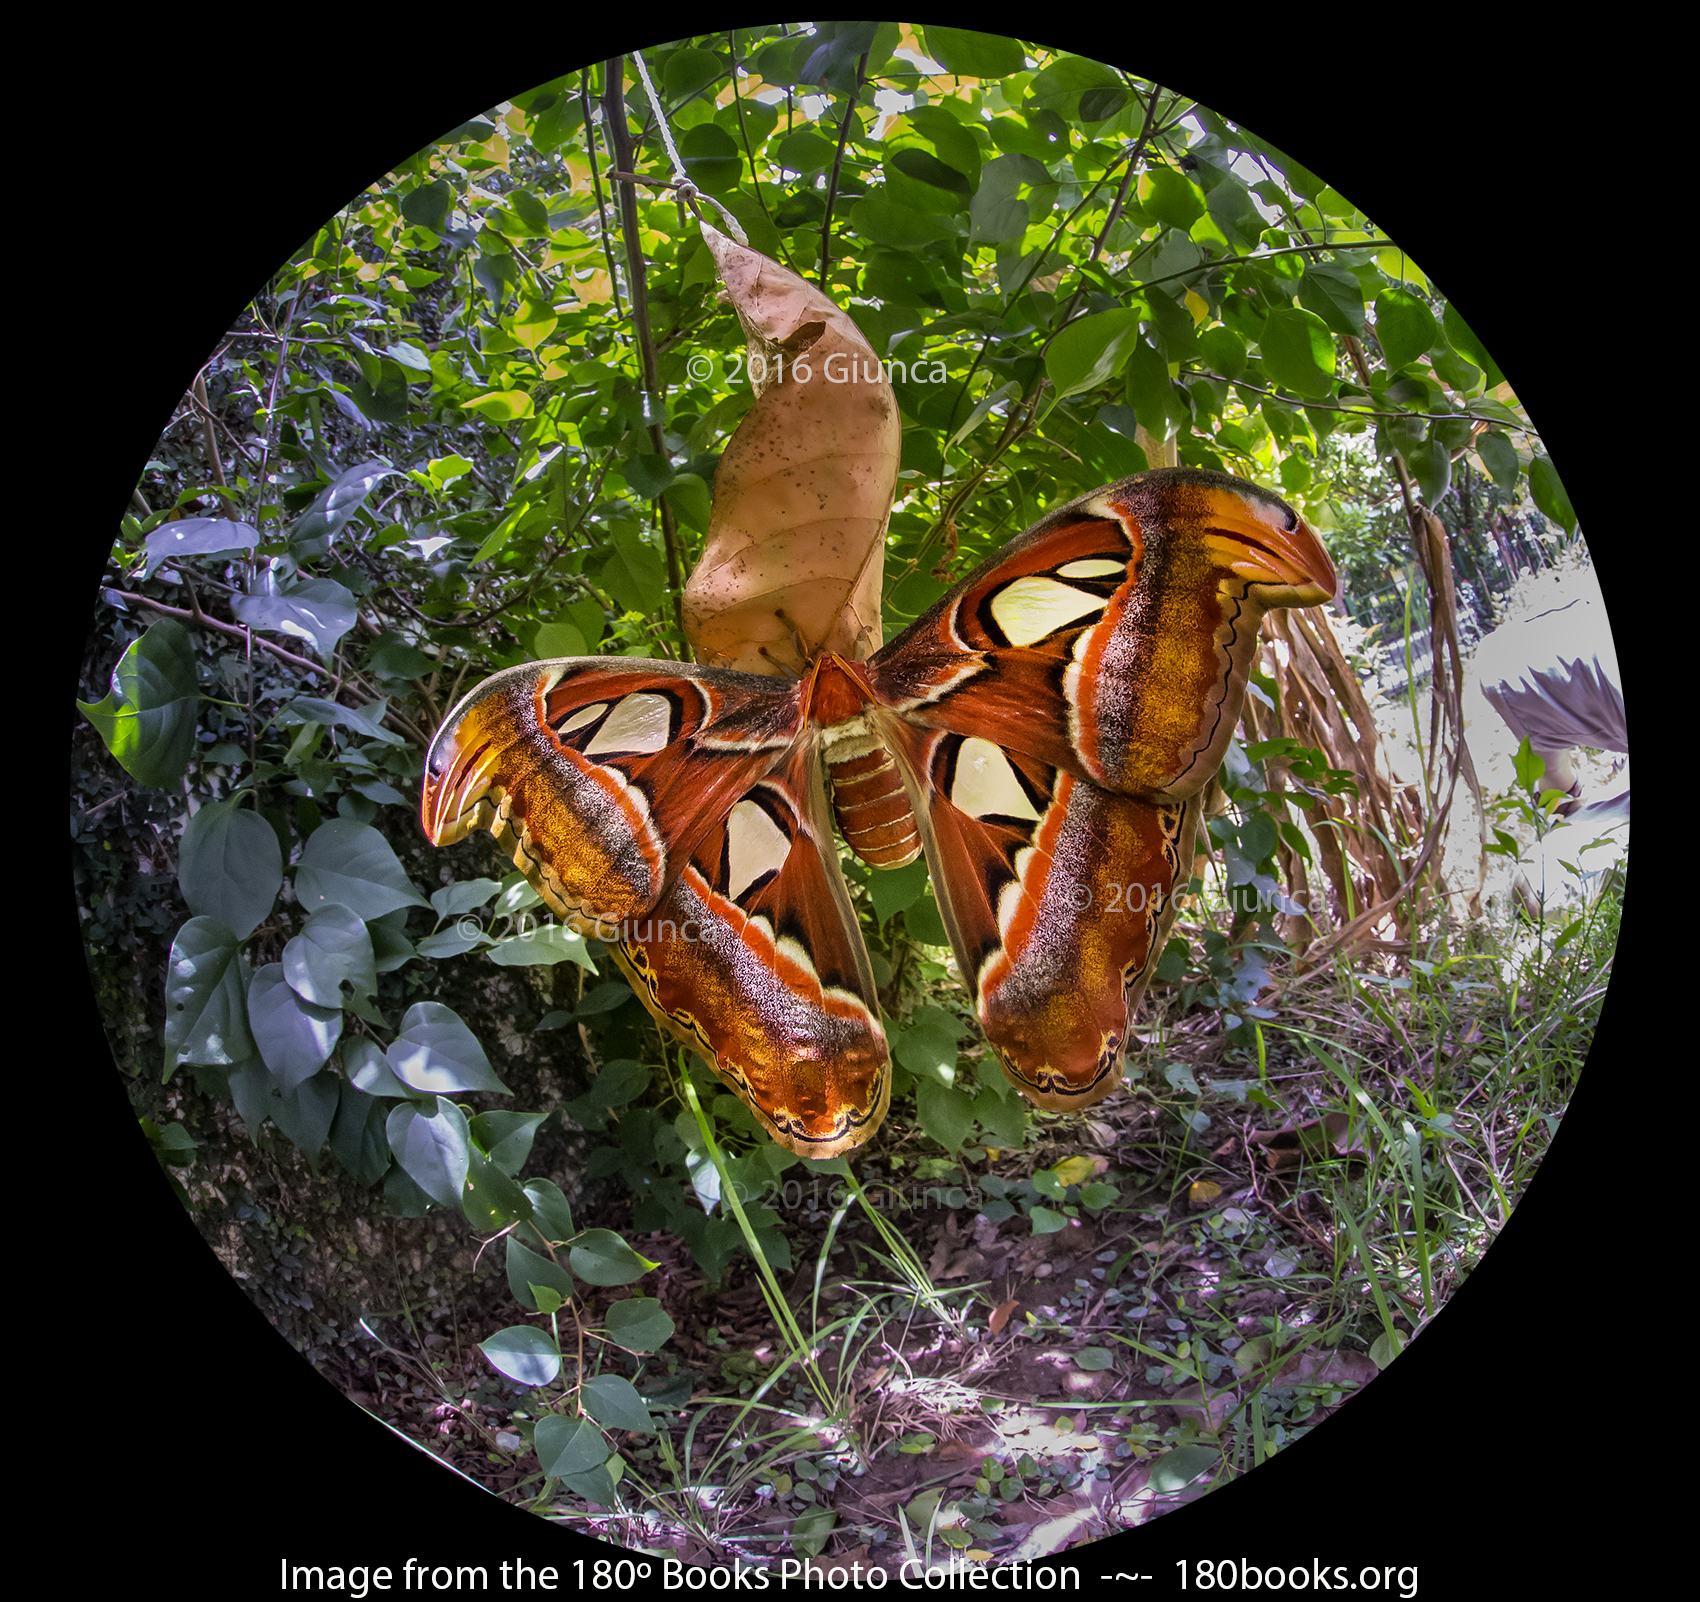 Image of Atlas Moth and Cocoon